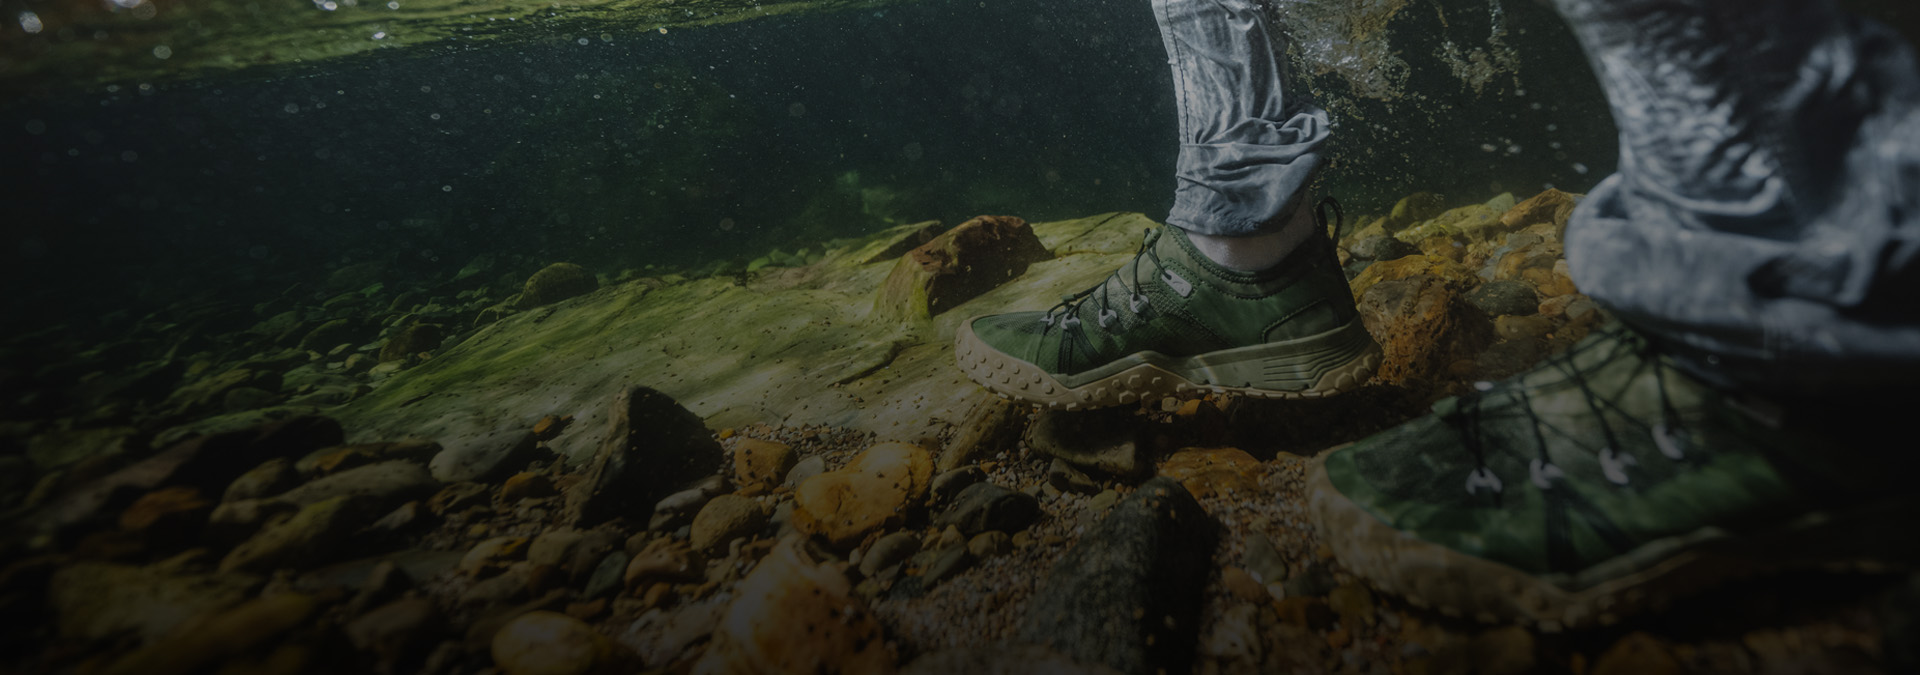 Simms Pursuit Shoe: Versatile Water Shoes for Anglers, Simms Fishing Blog